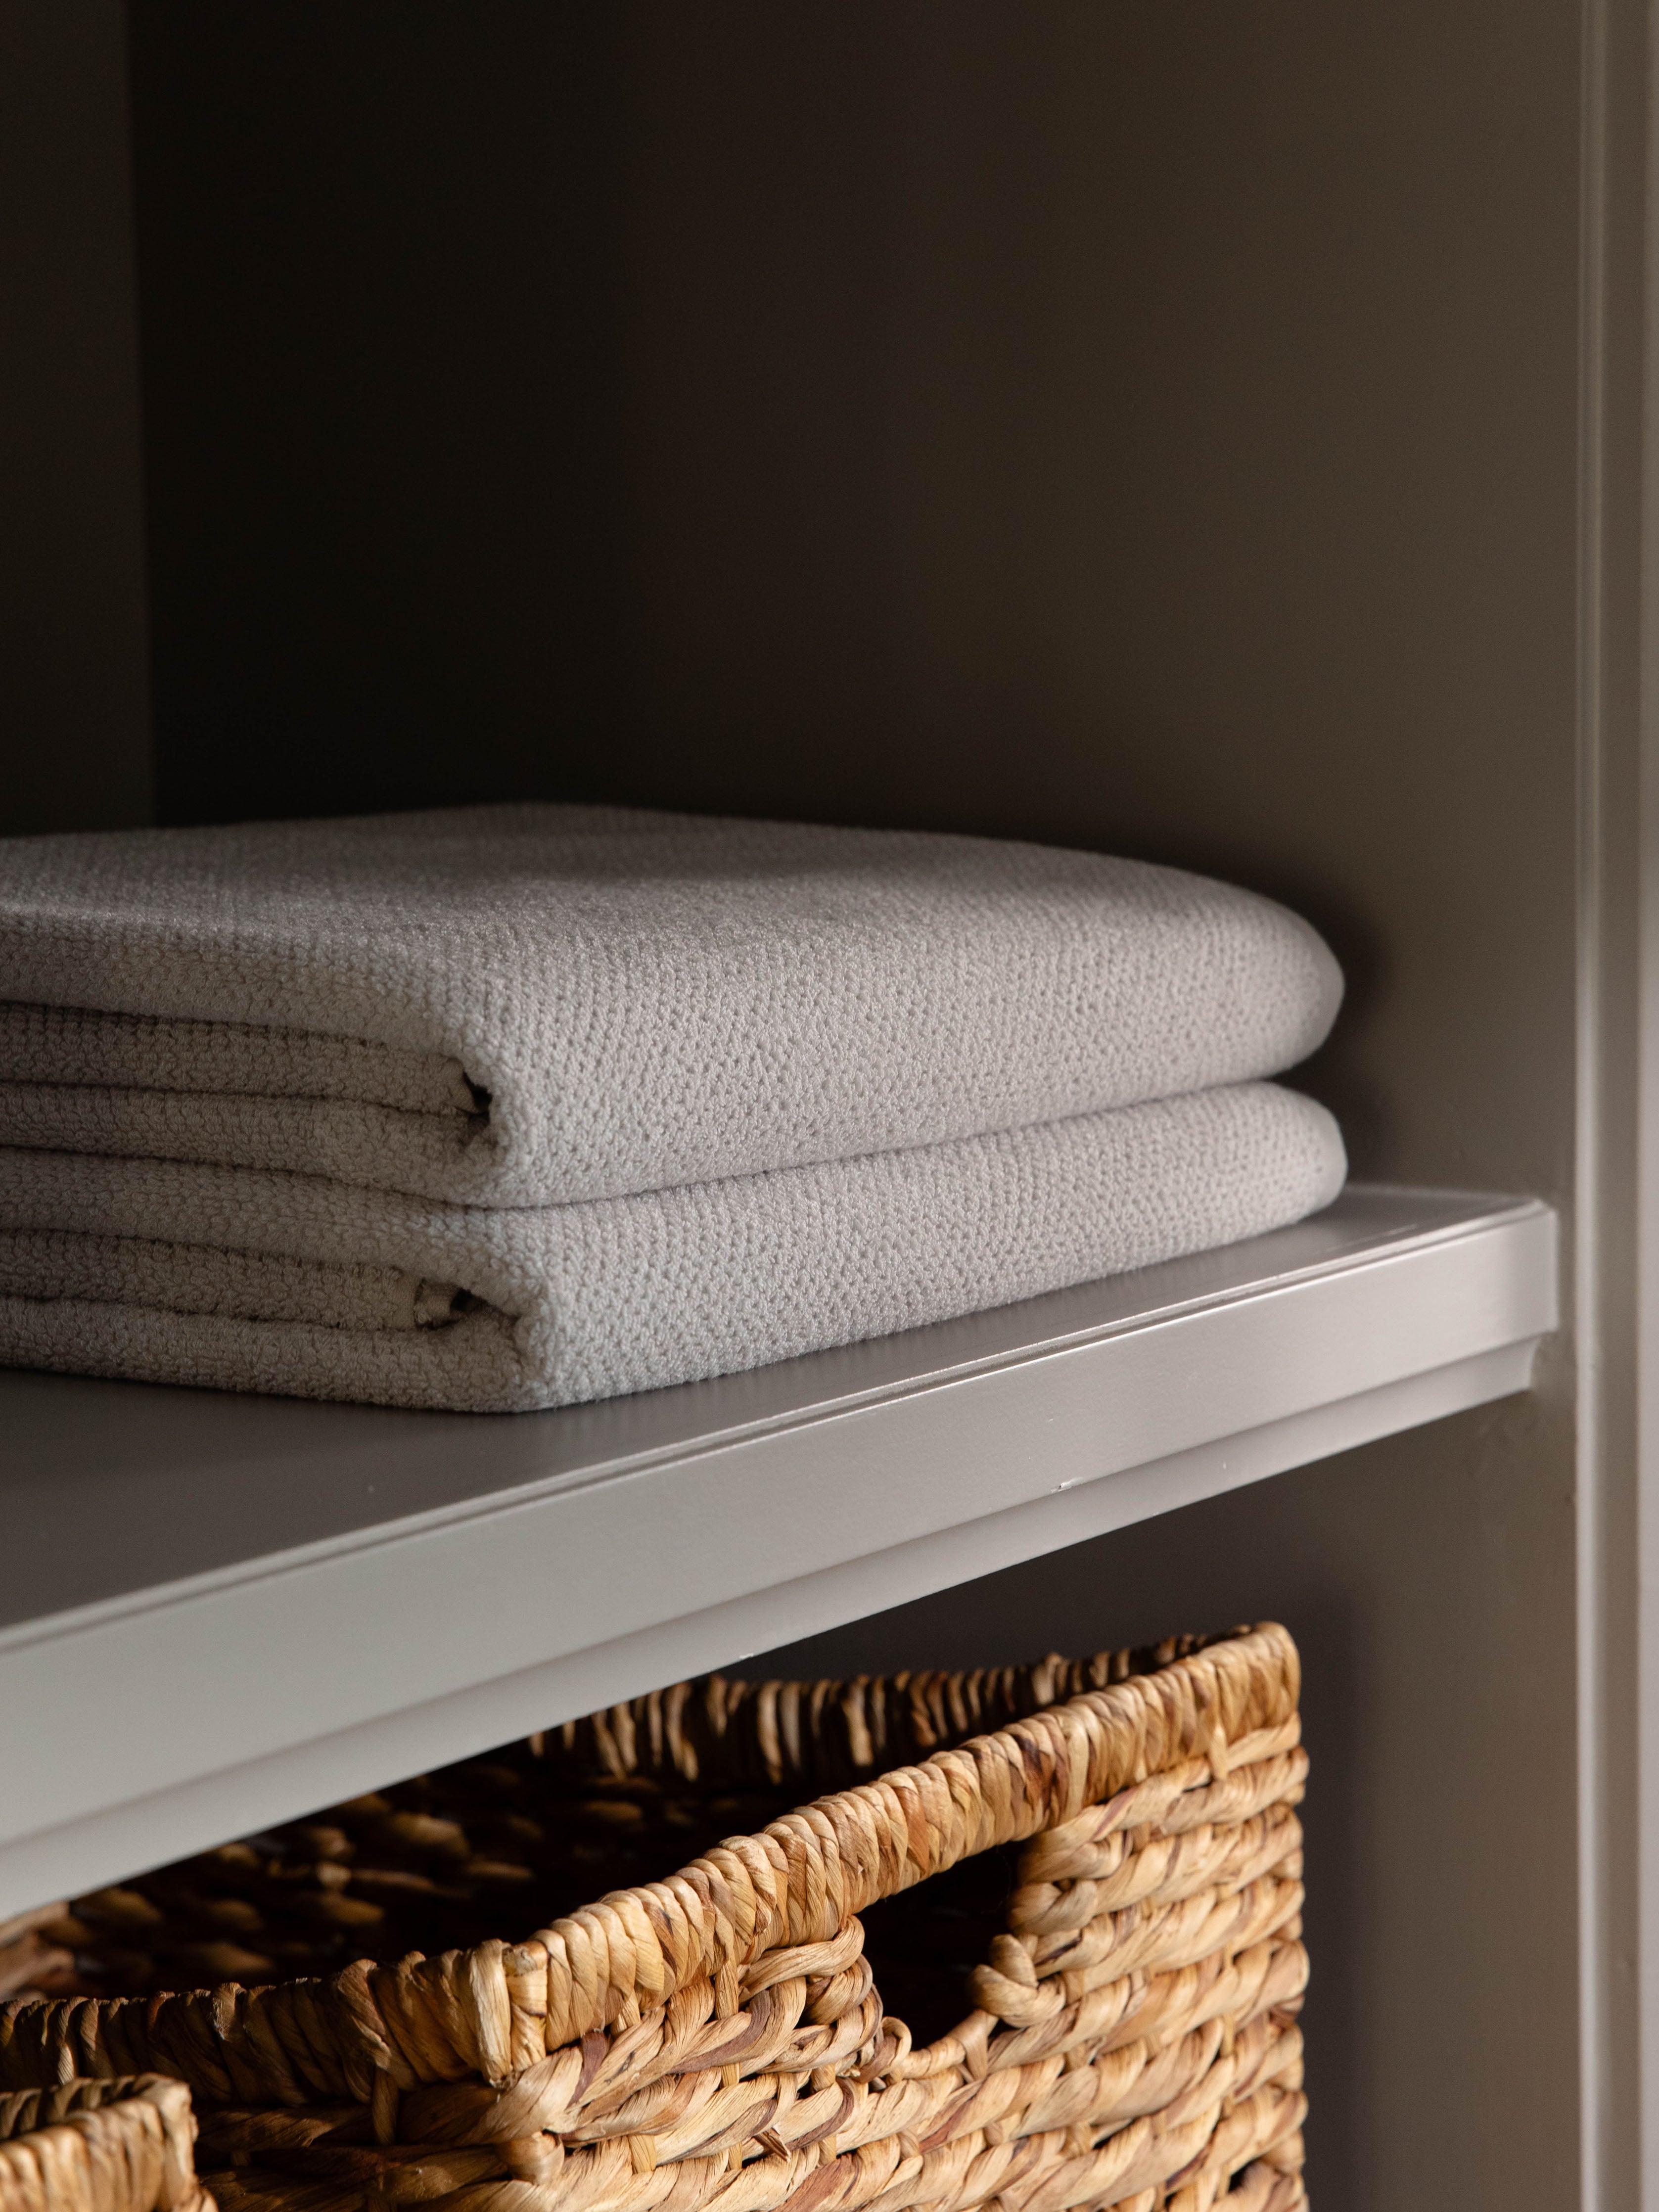 Nantucket Bath Towels in the color Heathered Light Grey. Photo of Nantucket Bath Towels taken as the towels rest on a shelf in a bathroom. |Color: Heathered Light Grey